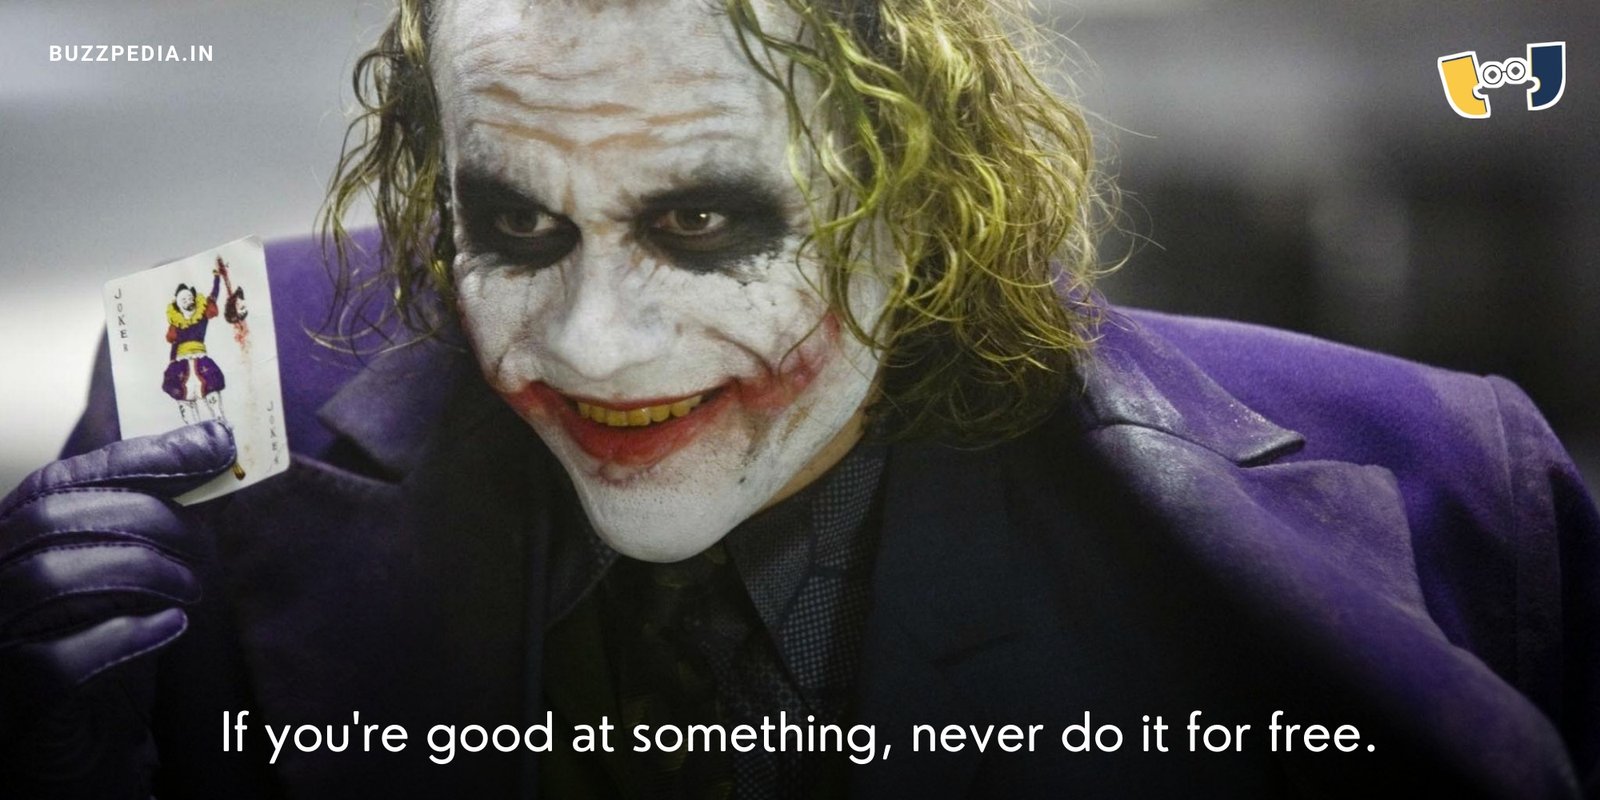 Batman Fan? Here Are 10 Of The Best Joker Quotes From “The Dark Knight”